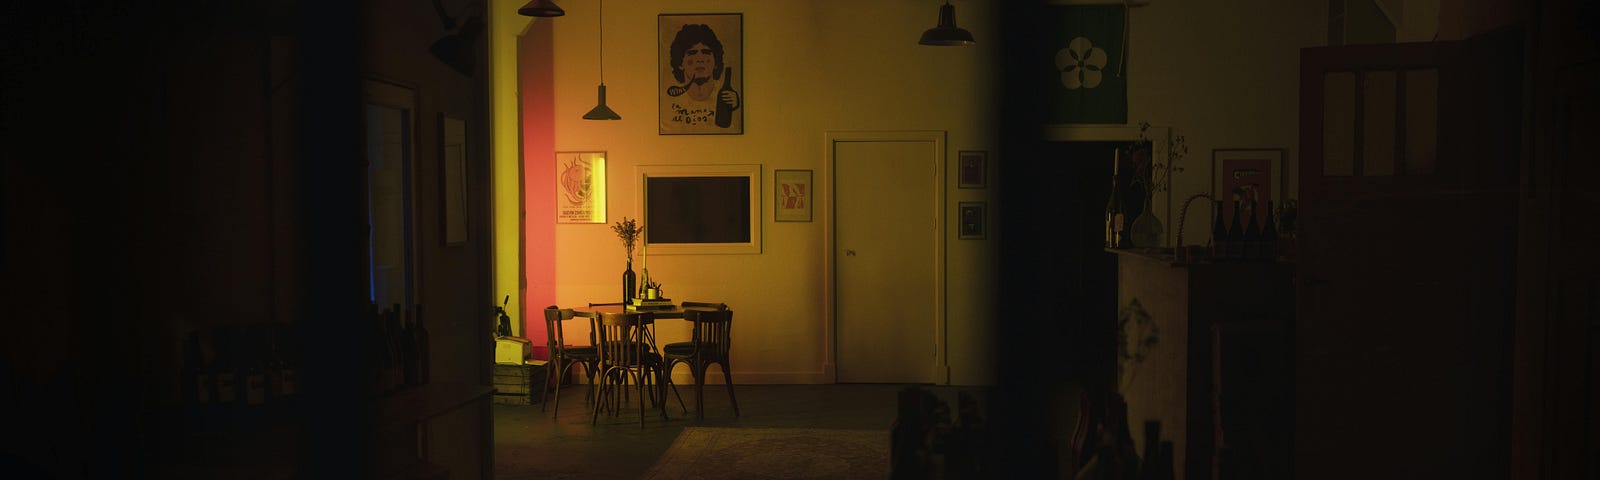 A photo of a dimly lighted dining room by Thomas balabaud from Pexels